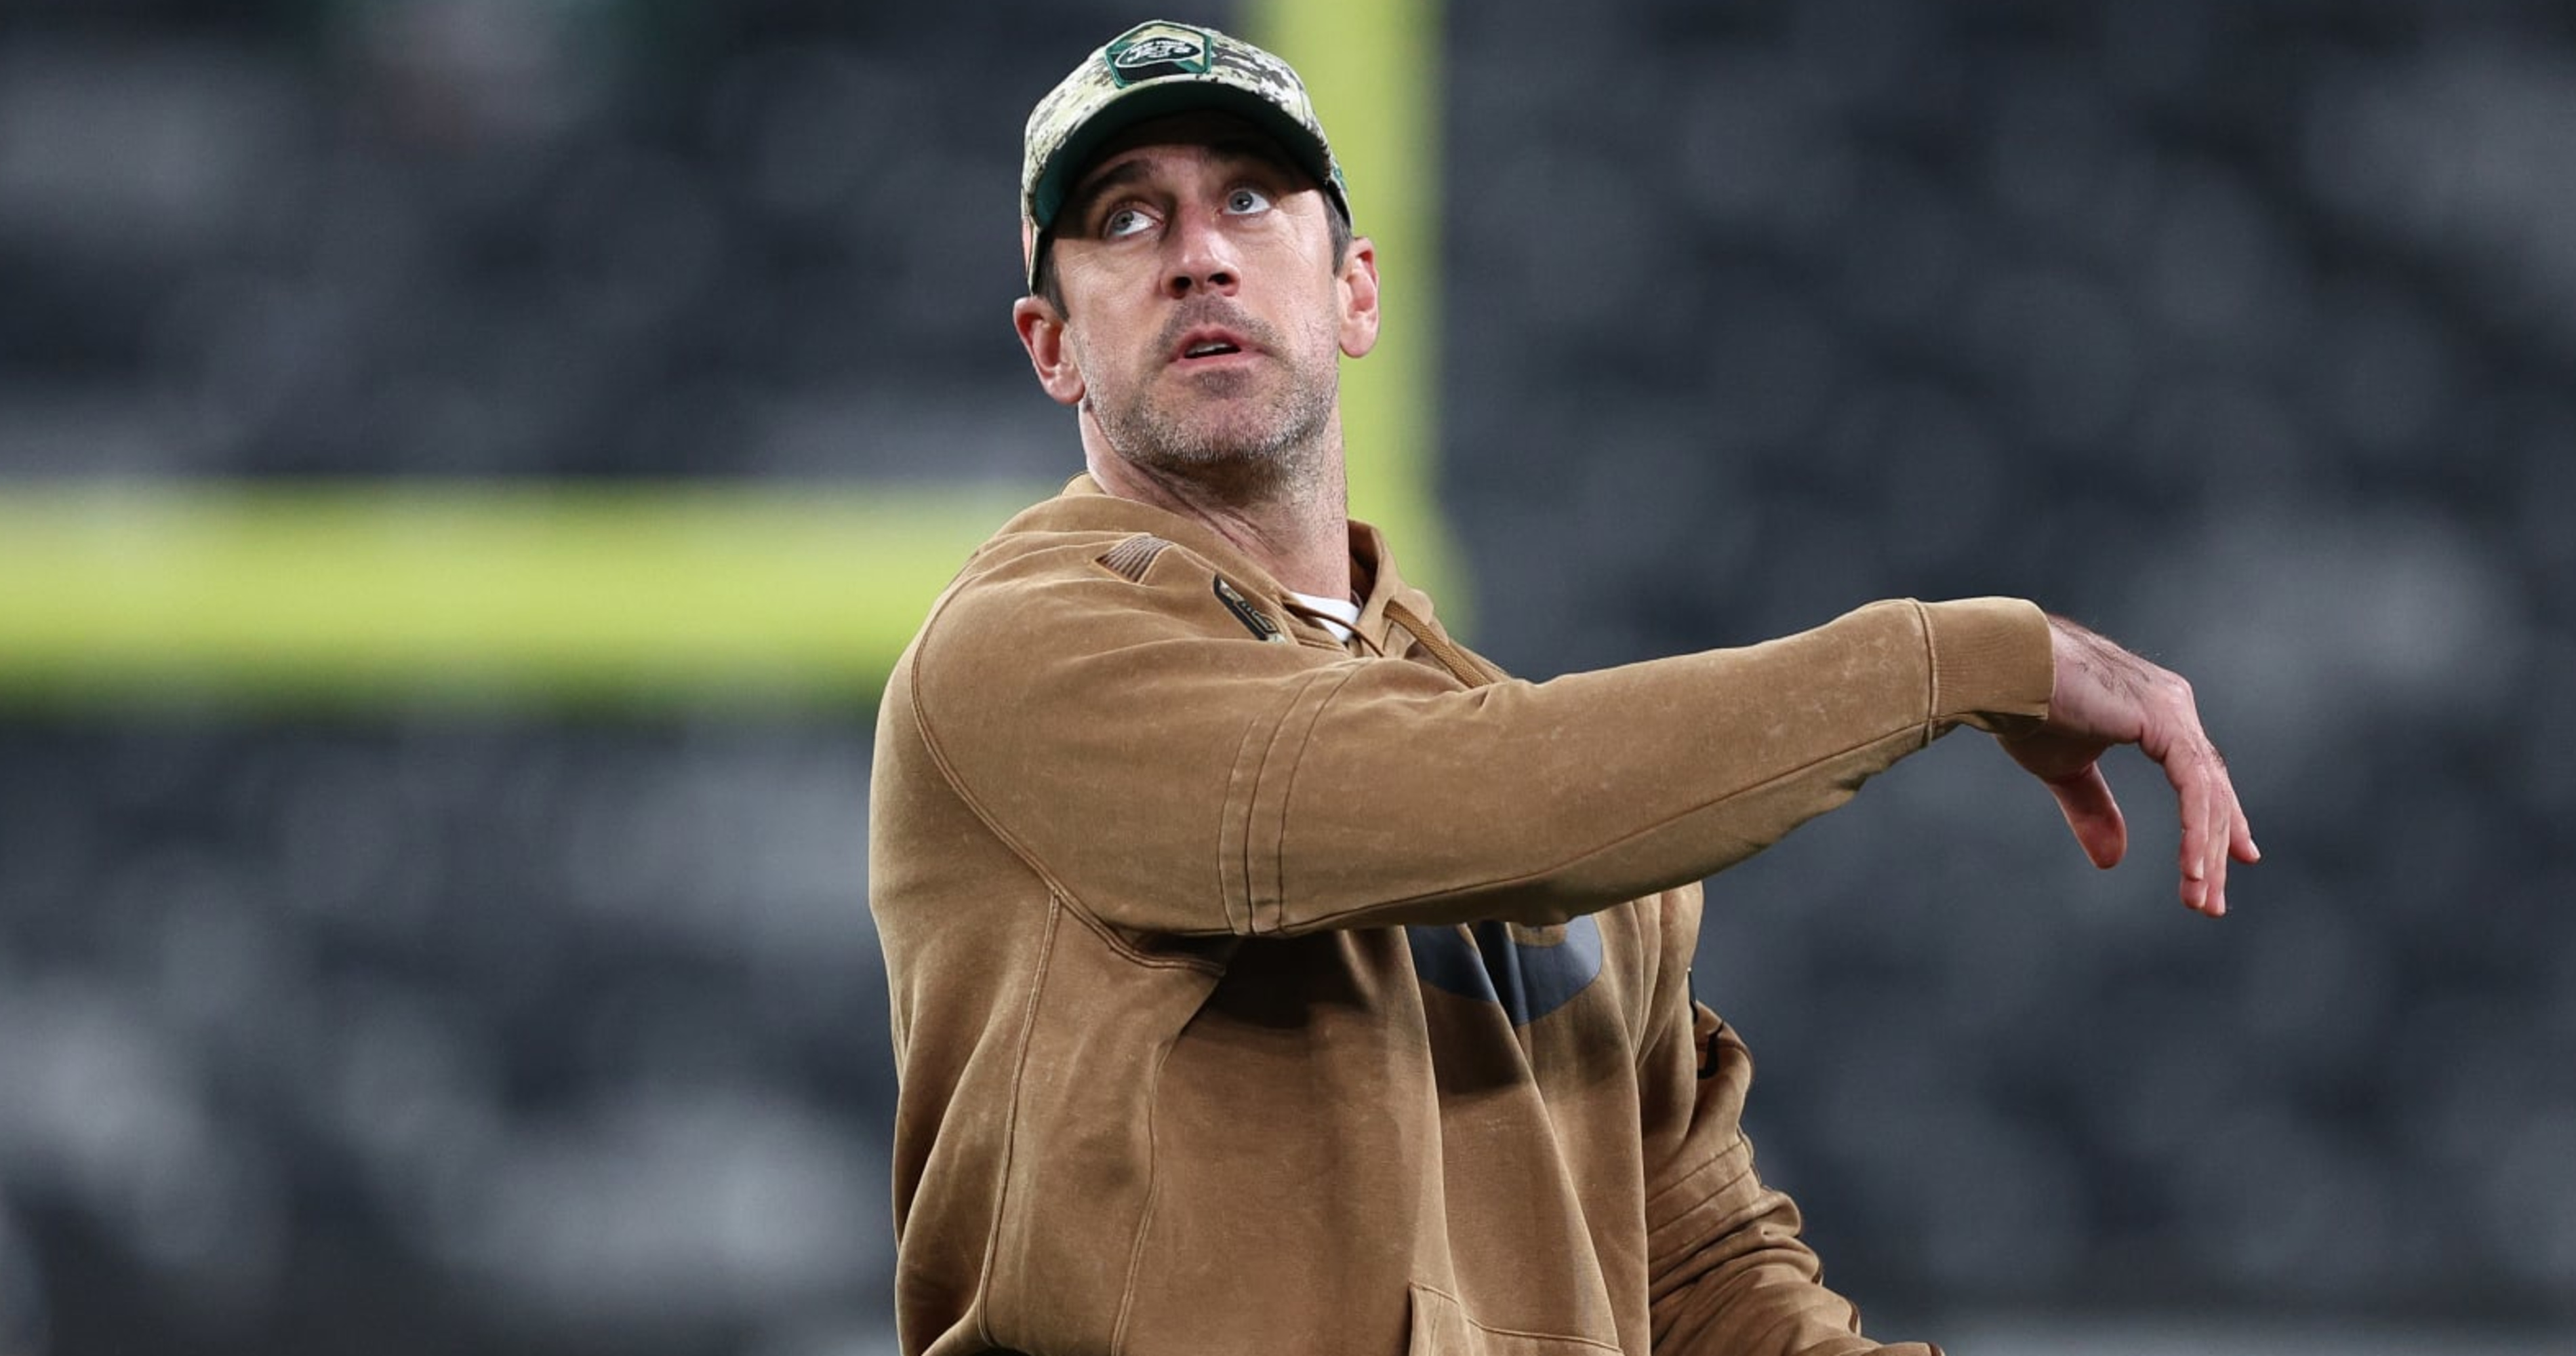 Jets' Aaron Rodgers Warned Against Returning from Injury This Season by Chad Johnson